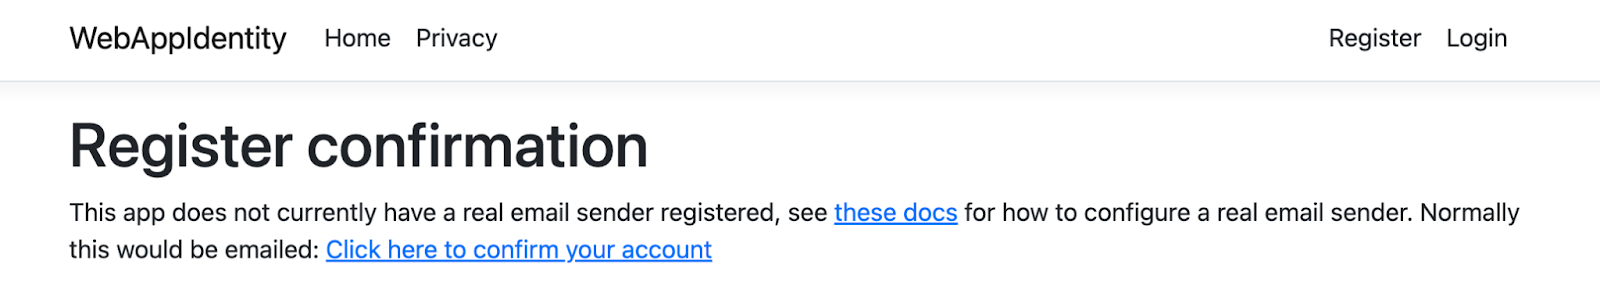 The Register confirmation page which would normally tell you to confirm your email by going to your mail inbox, but now simply provides the confirmation link on the page.